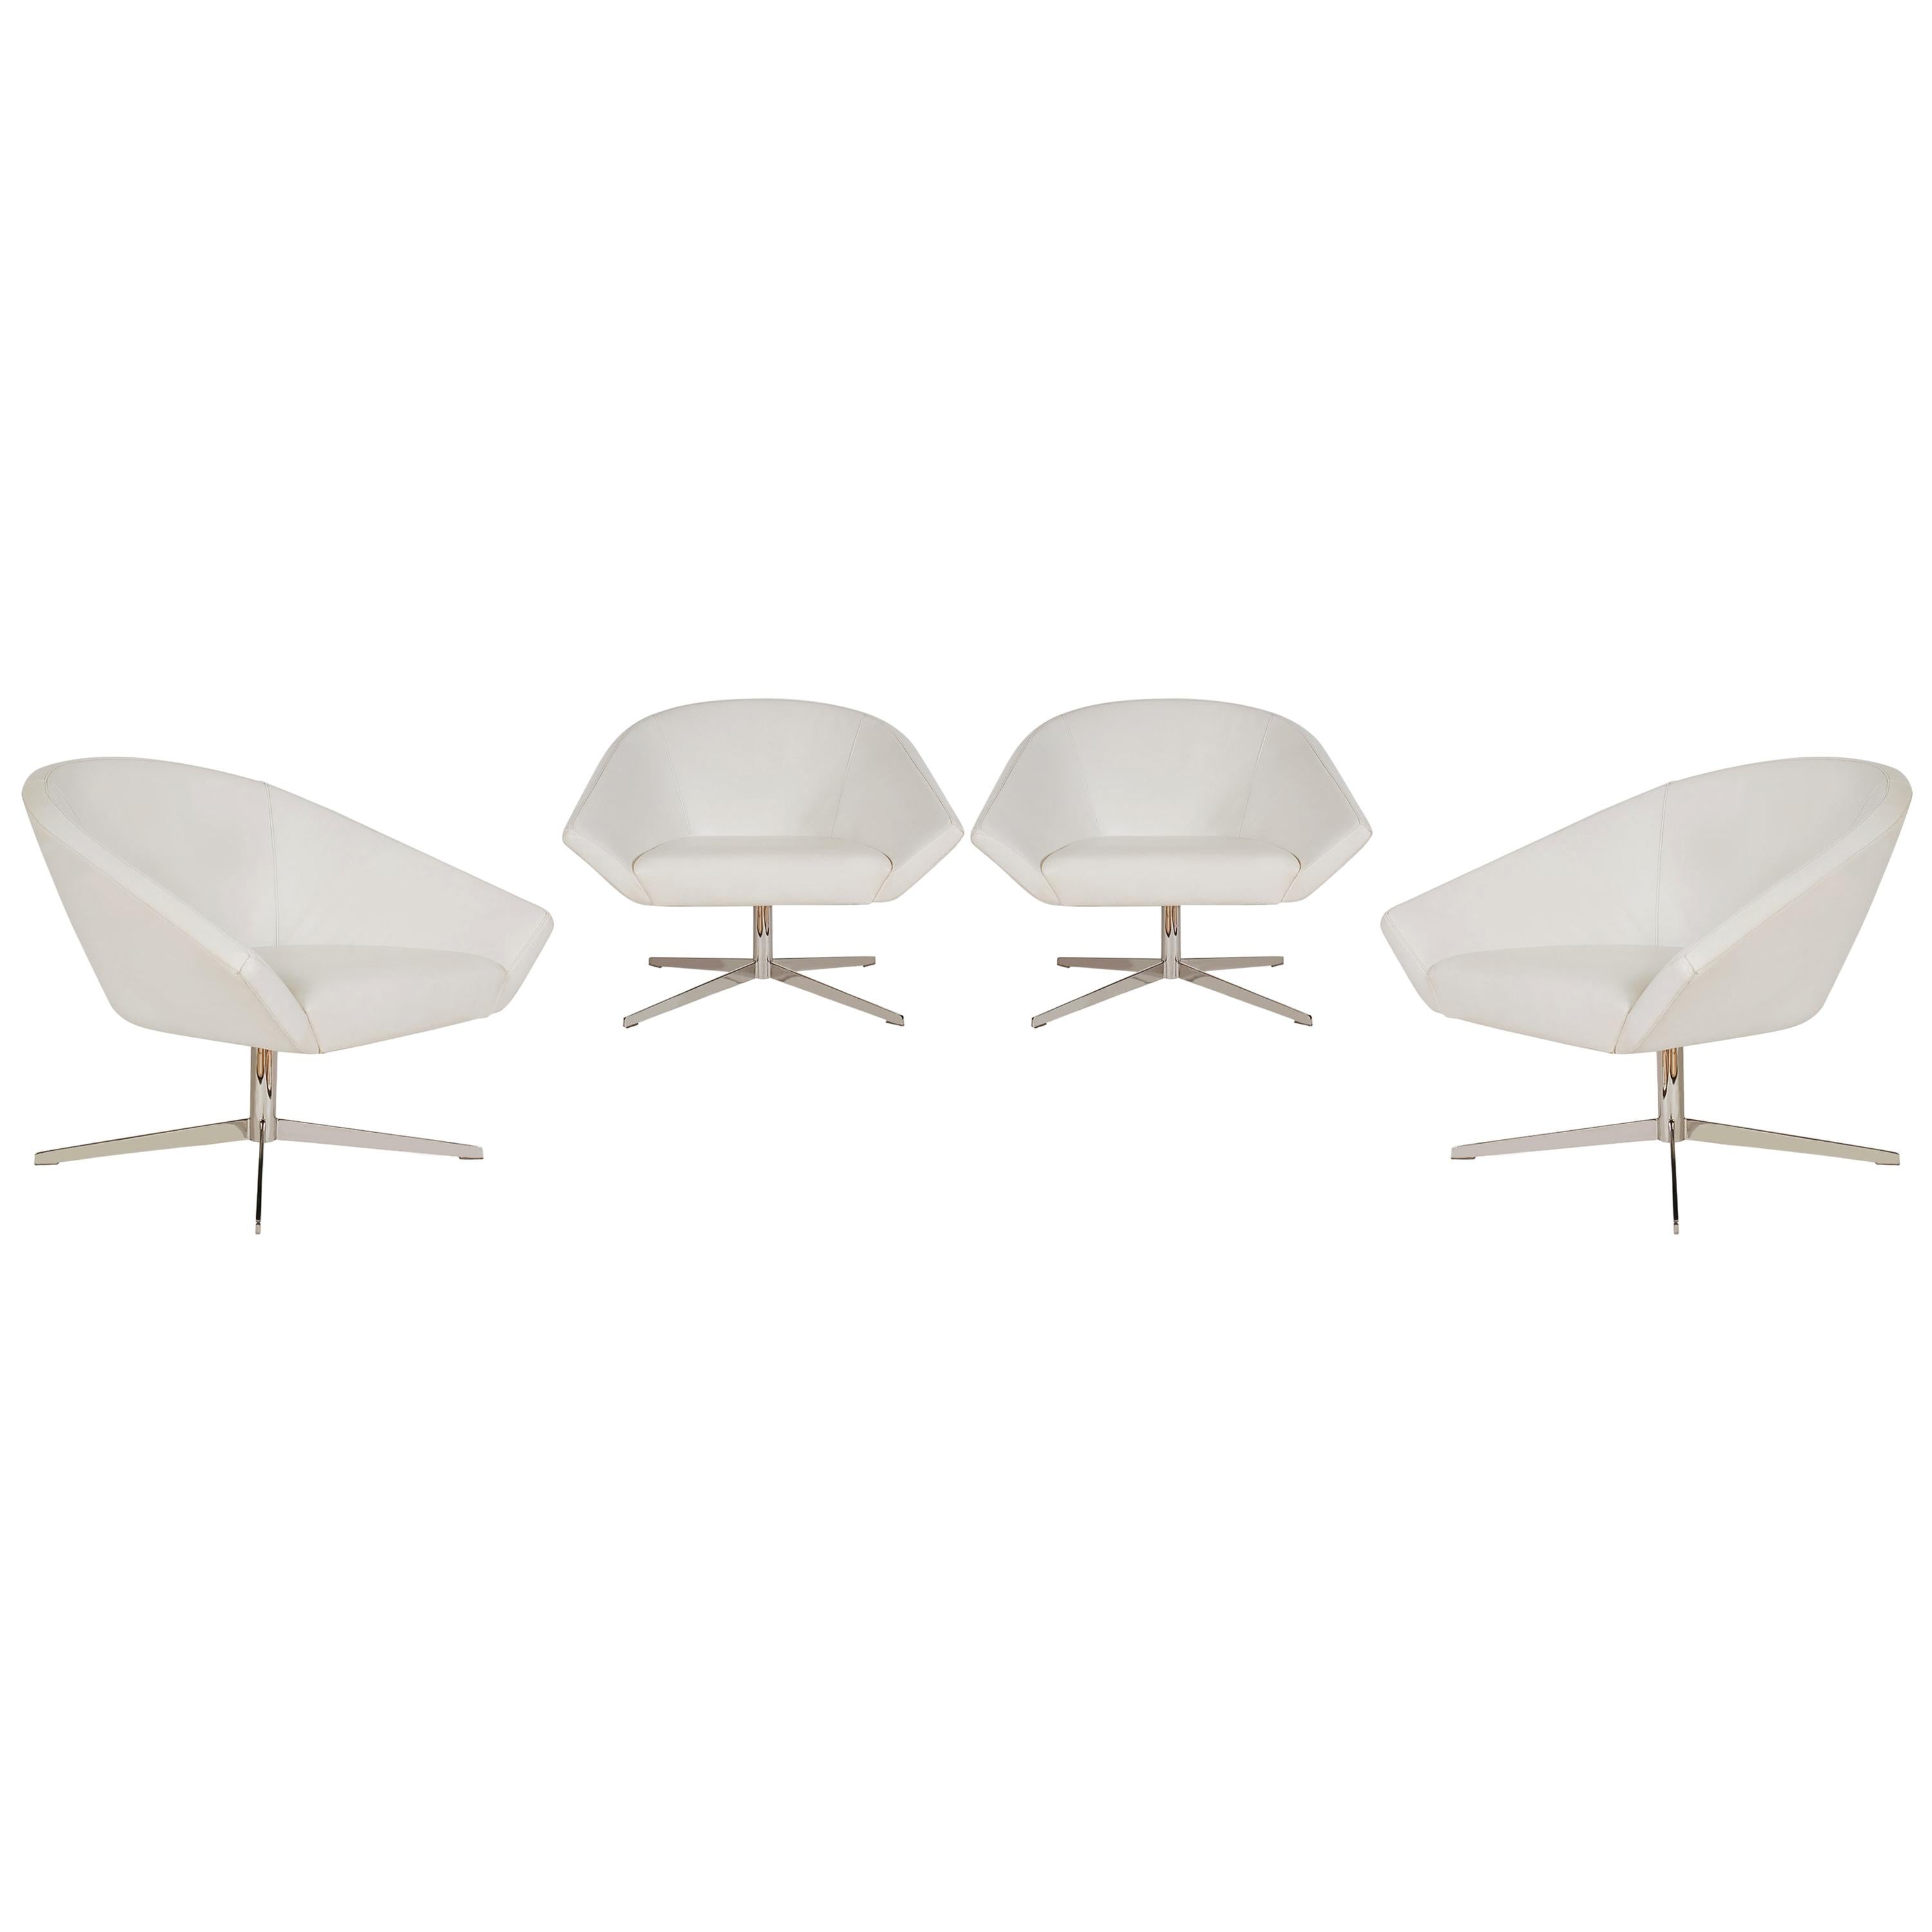 Set of Four Mid-Century Modern White Swivel Lounge Chairs by Bernhardt